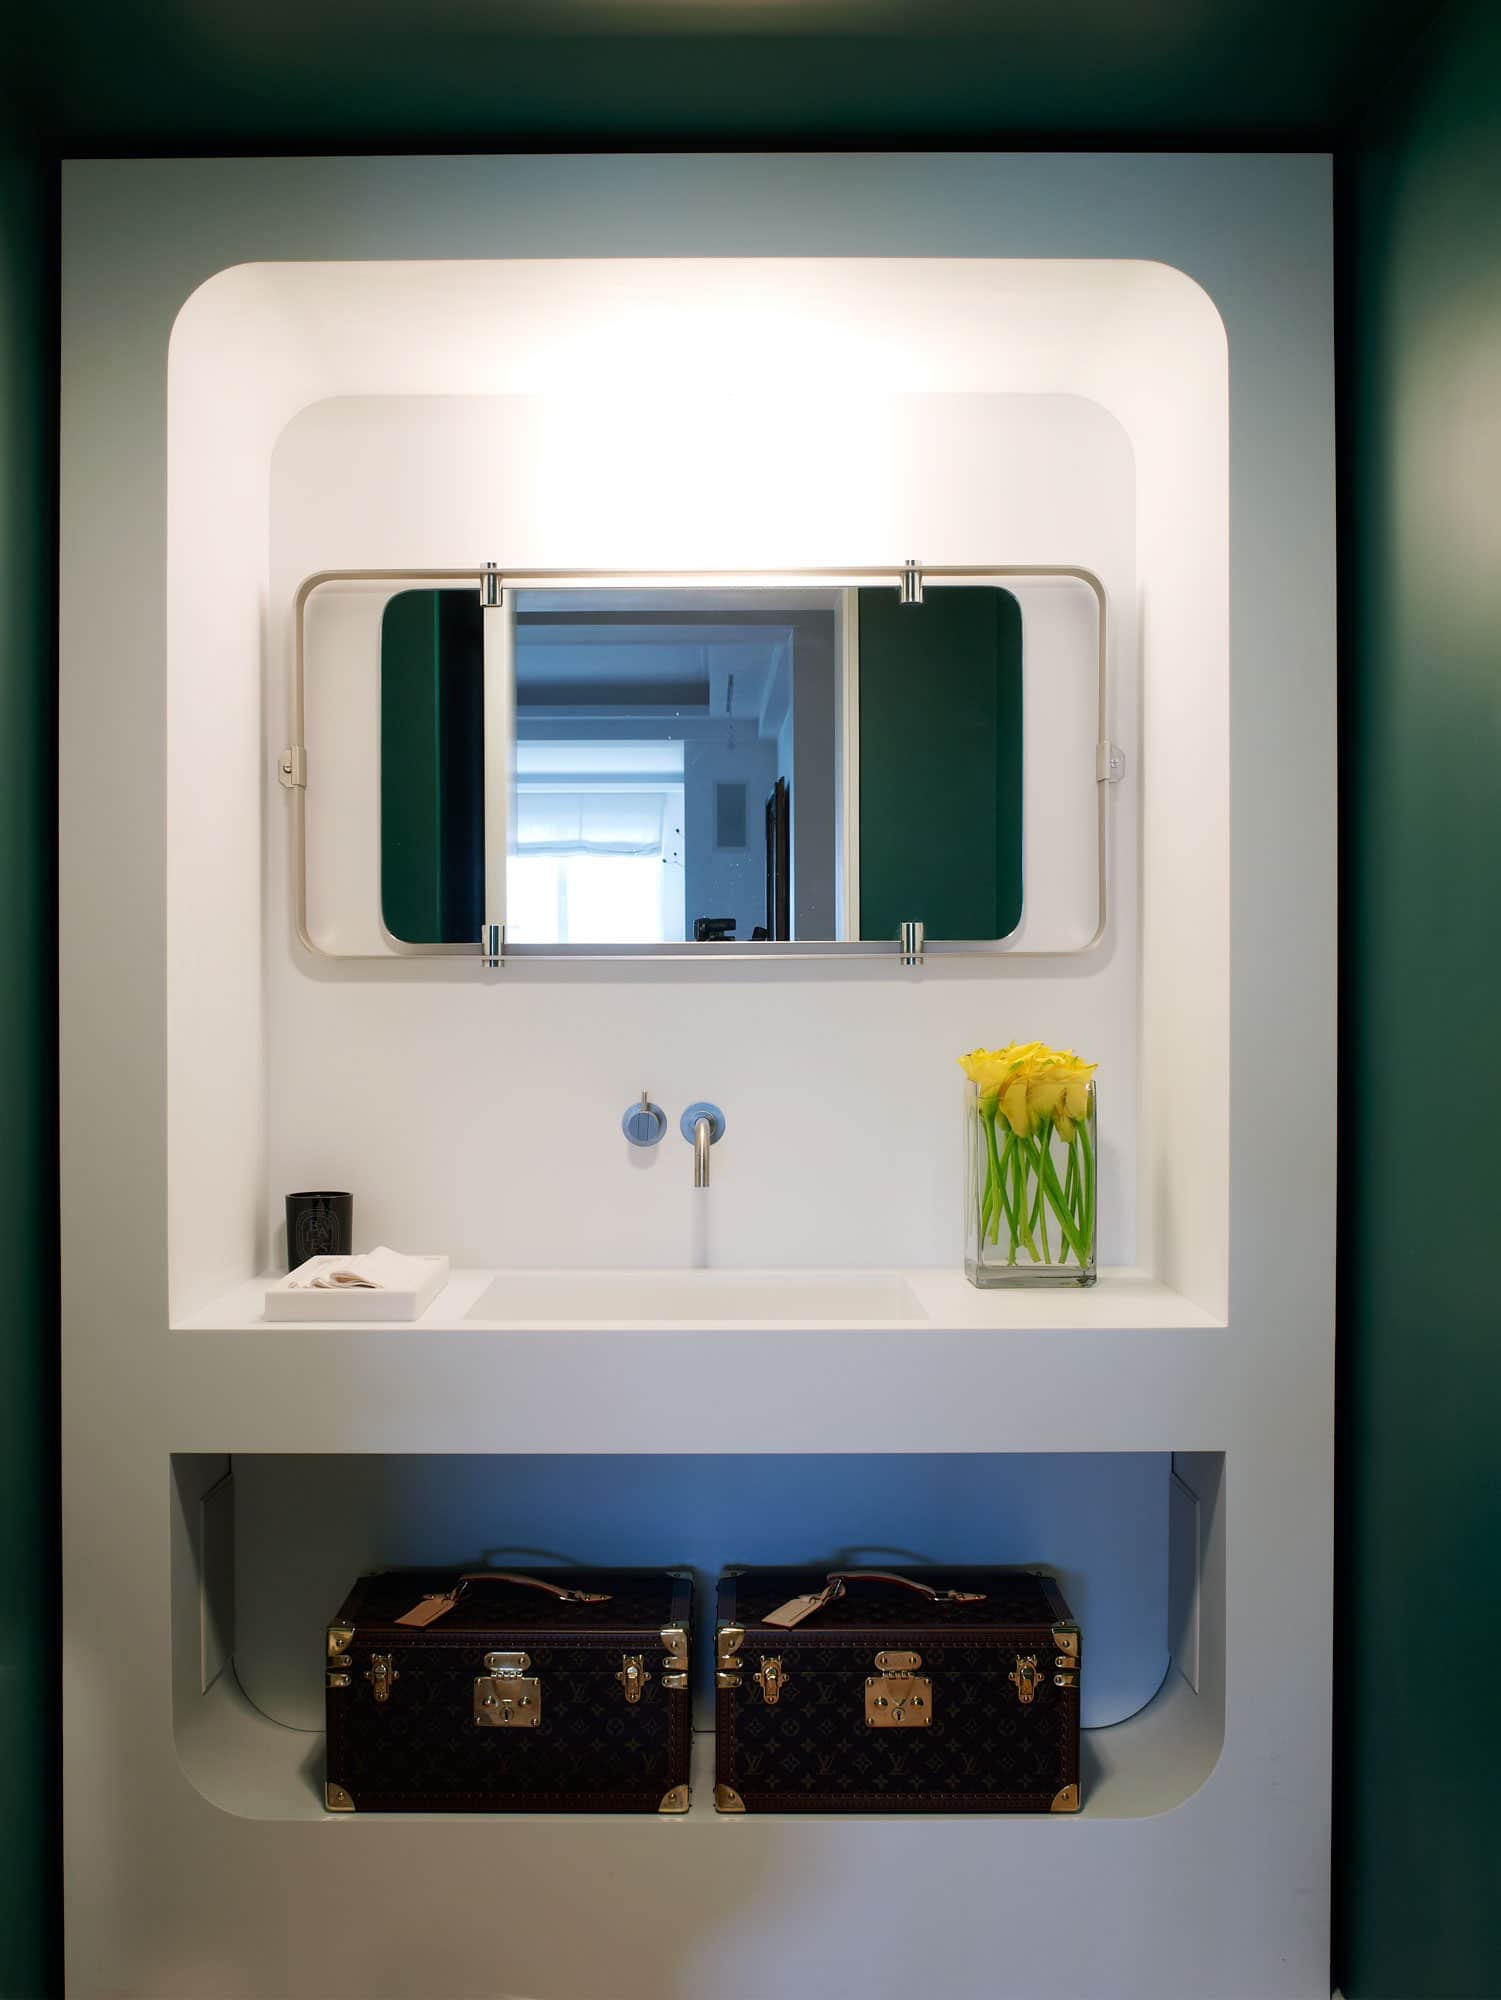 This image shows a powder room with a white Corian framework enclosing the sink and niche shelves below the sink.  The room is painted in a pantone modern green color contrasting the white Corian framed sink wall.  Hung on the Corian wall is a modernist mirror with steel frame and vintage train travel cases by Louis Vuitton.